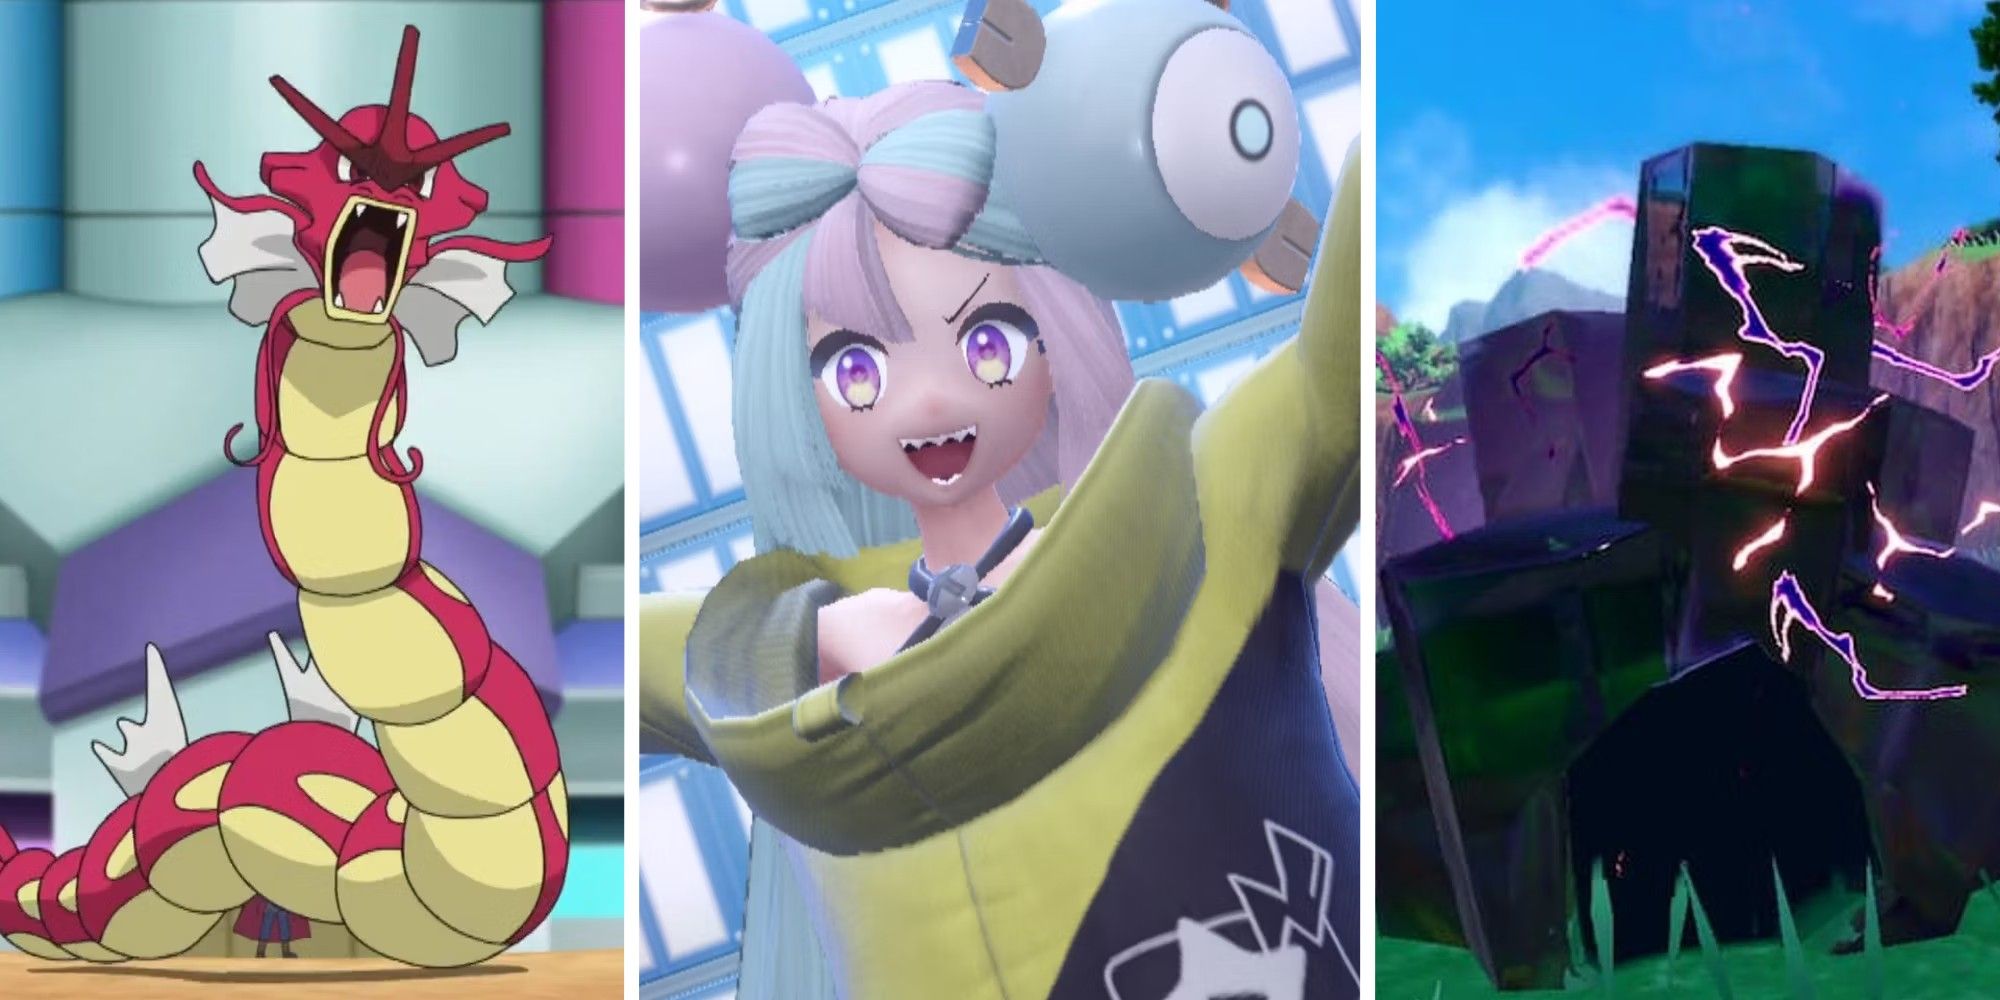 How to get exclusive content in Pokemon Scarlet and Violet 